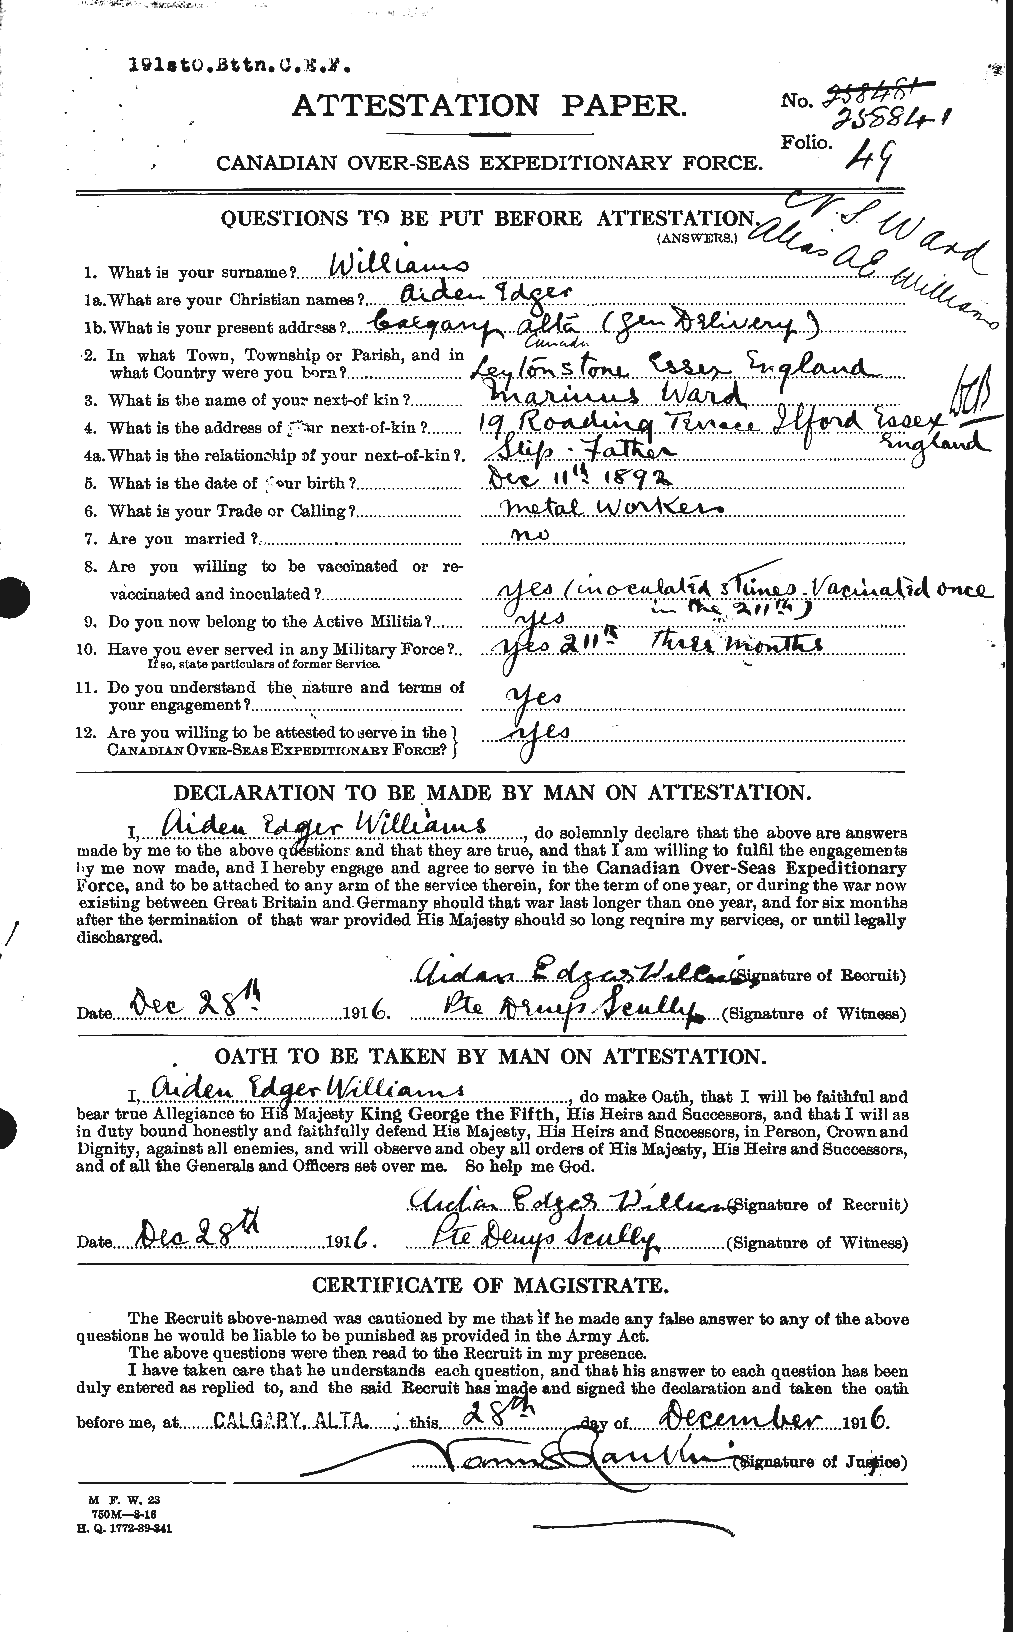 Personnel Records of the First World War - CEF 655079a